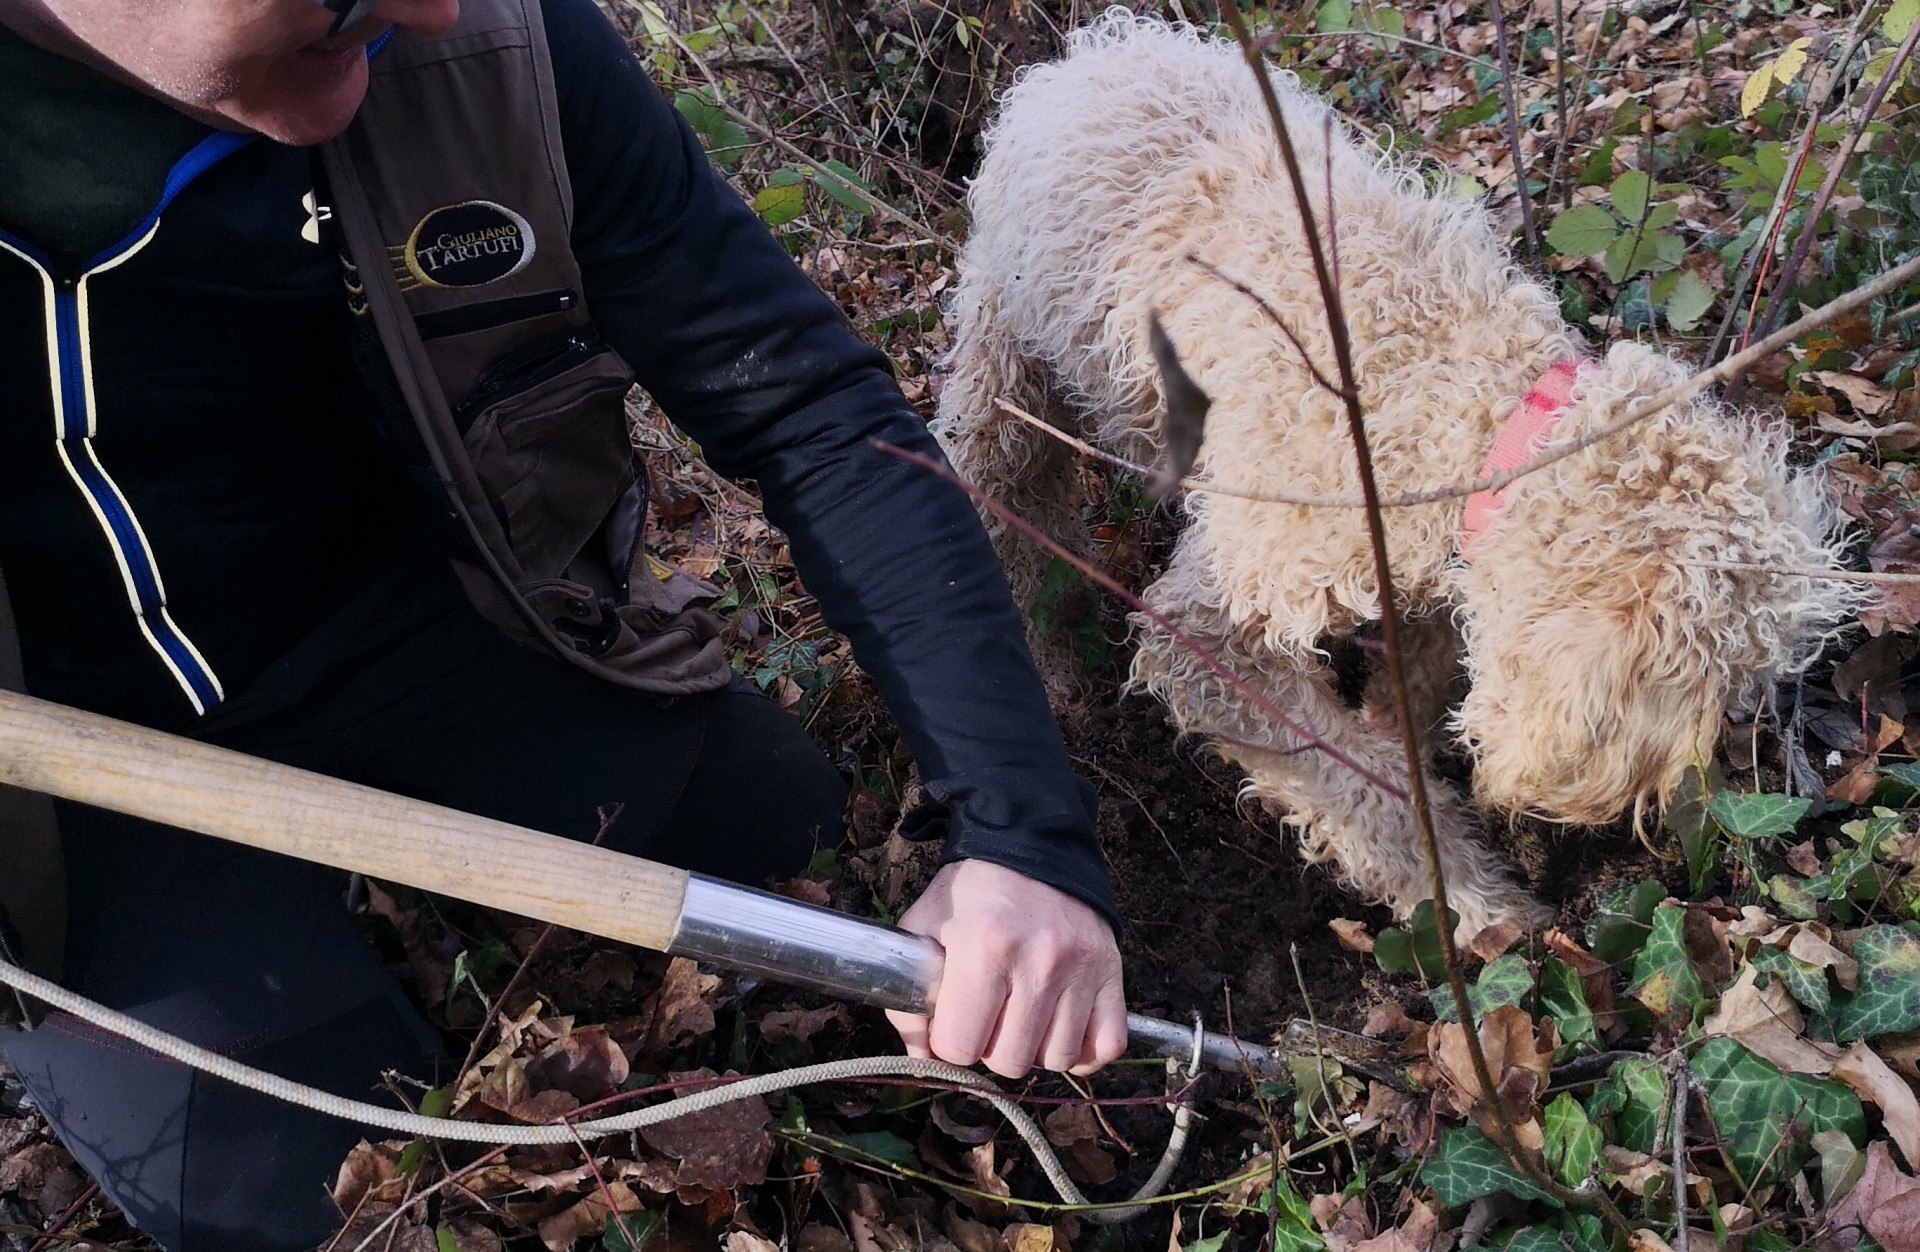 Truffle Hunting: discover the truffles world